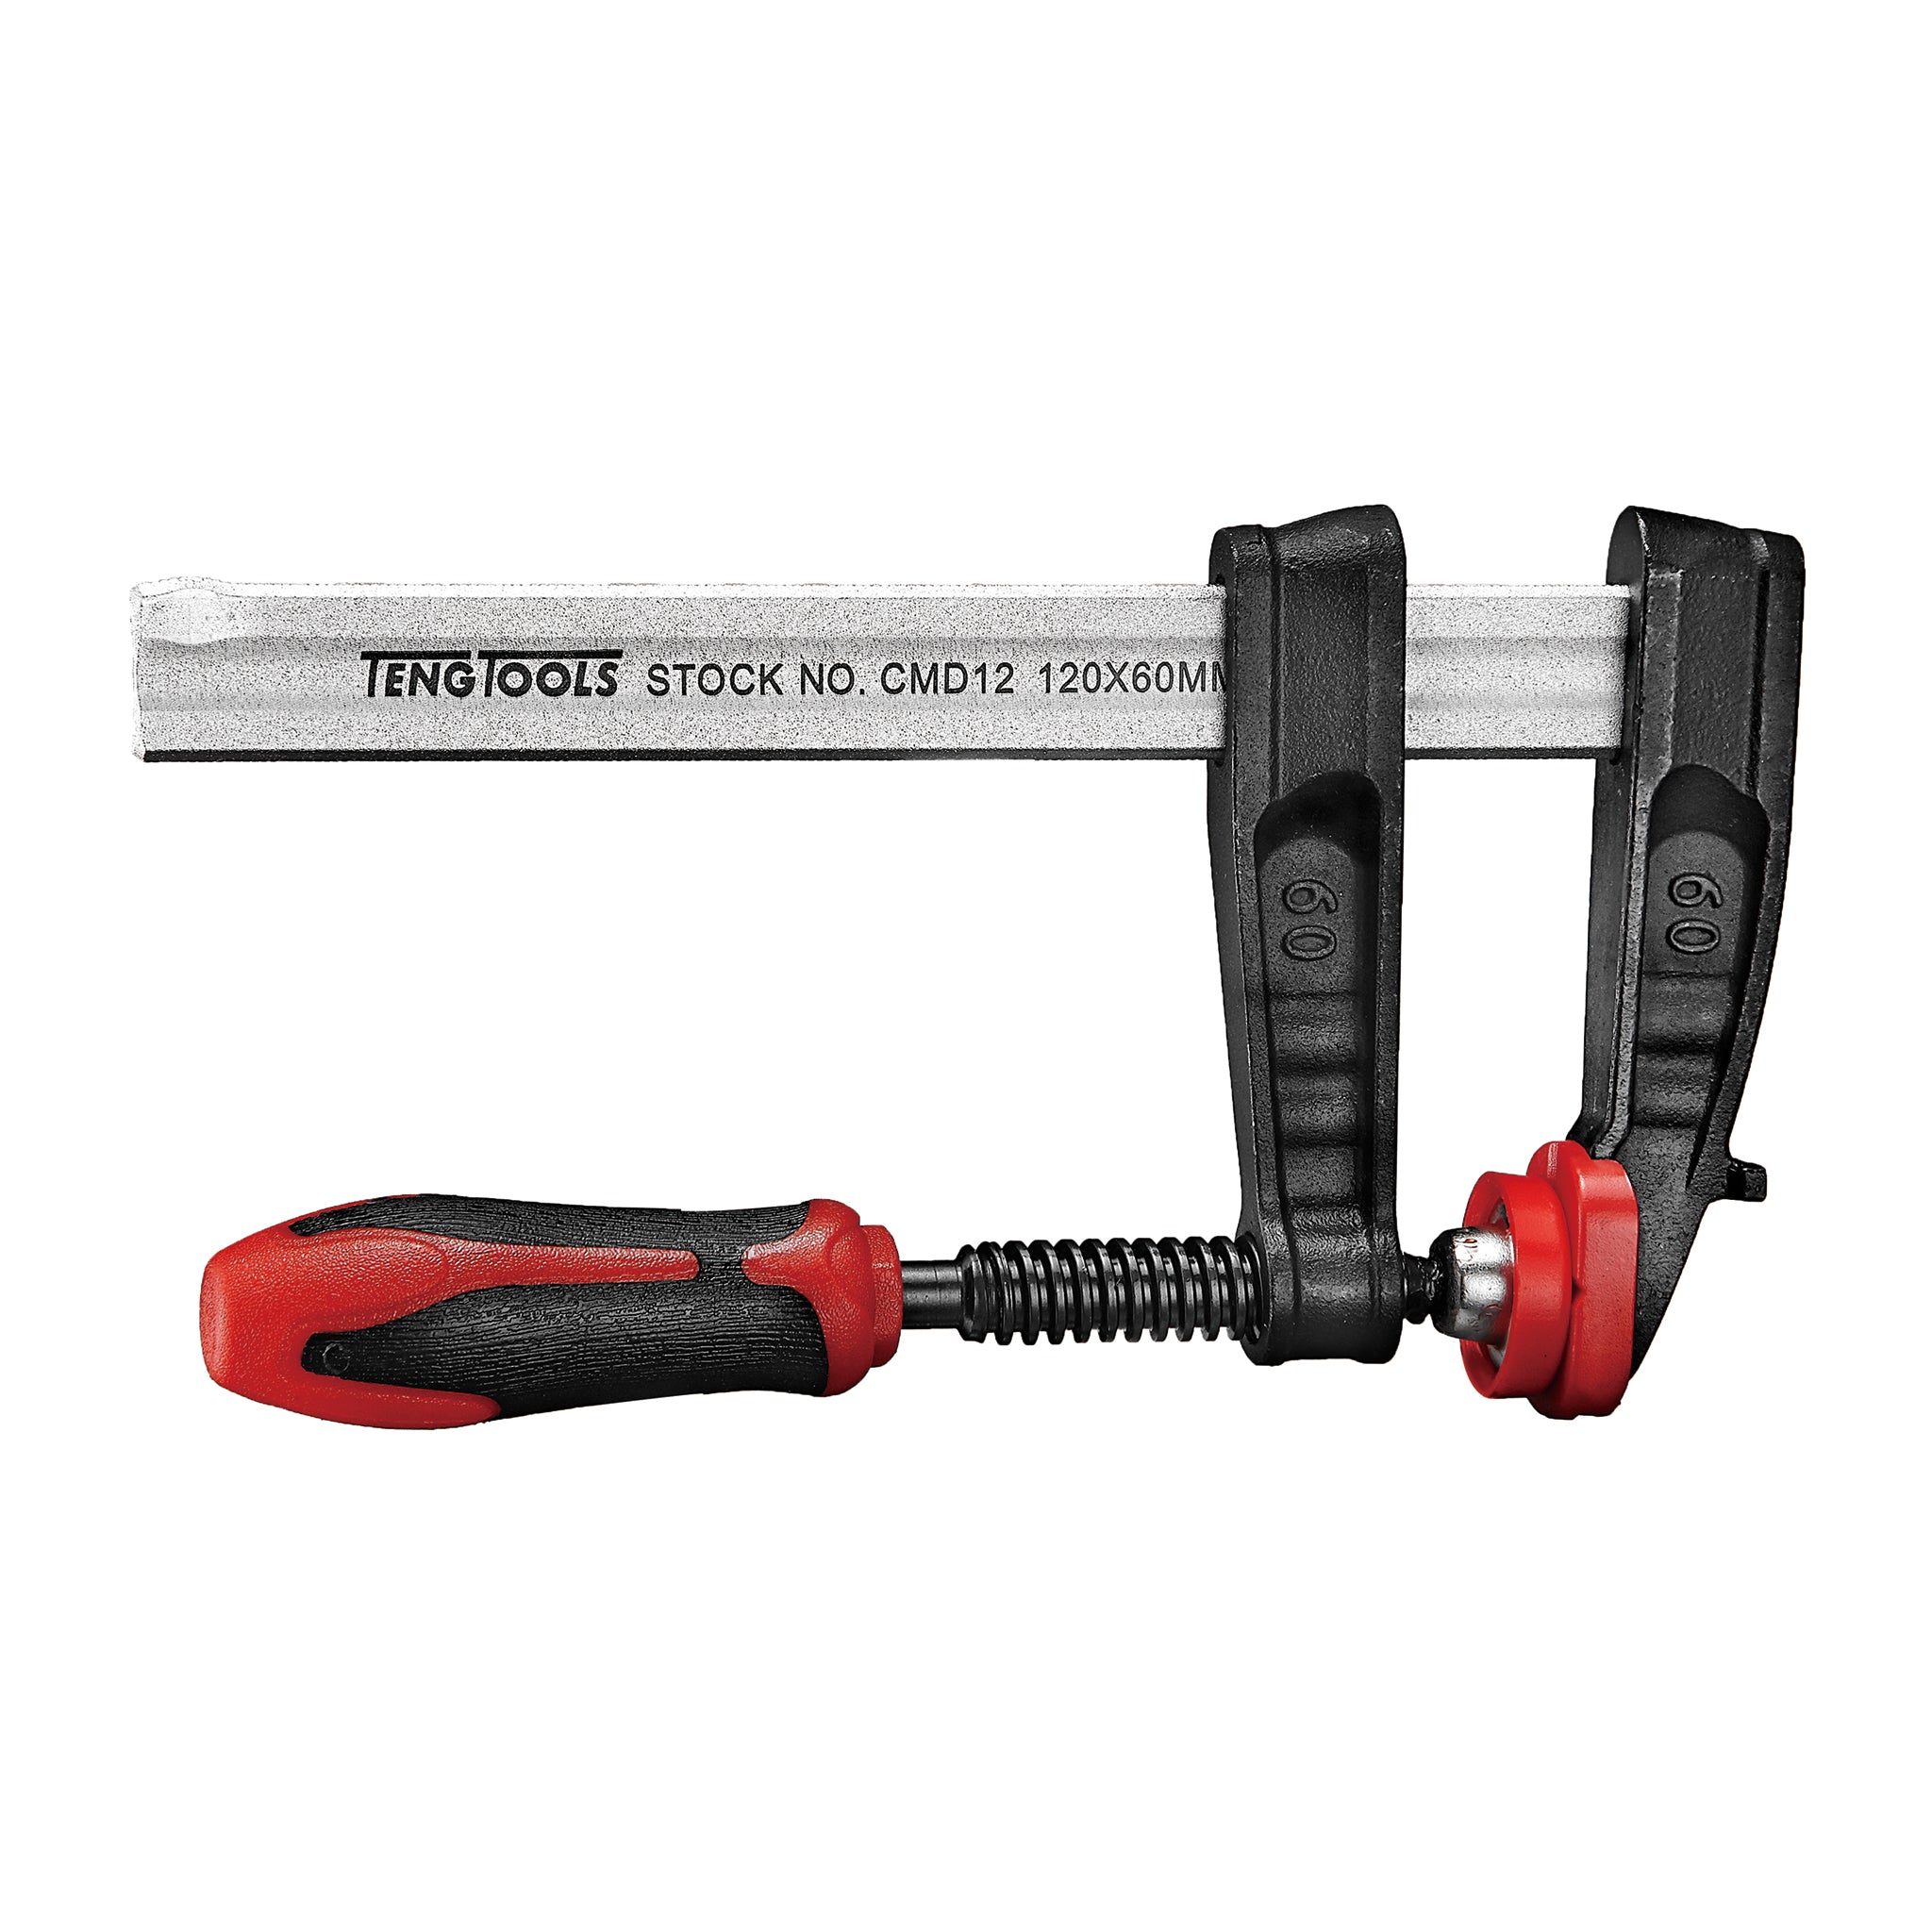 Teng Tools F-Clamps With Bi Material Handles - 250x120MM